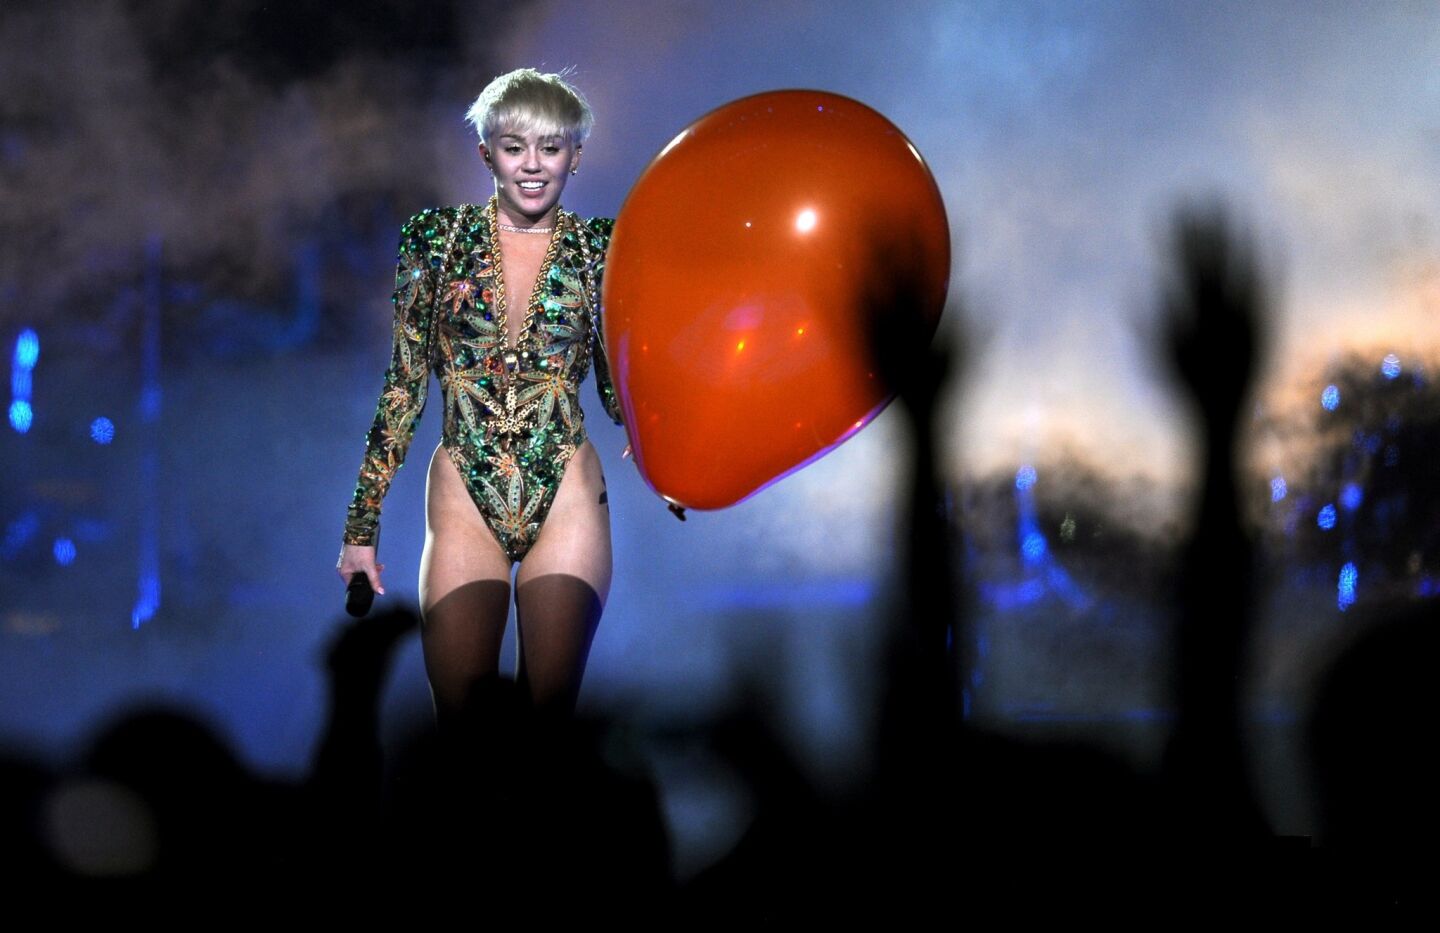 Miley Cyrus clutches a large red balloon -- just one of her props for the evening.